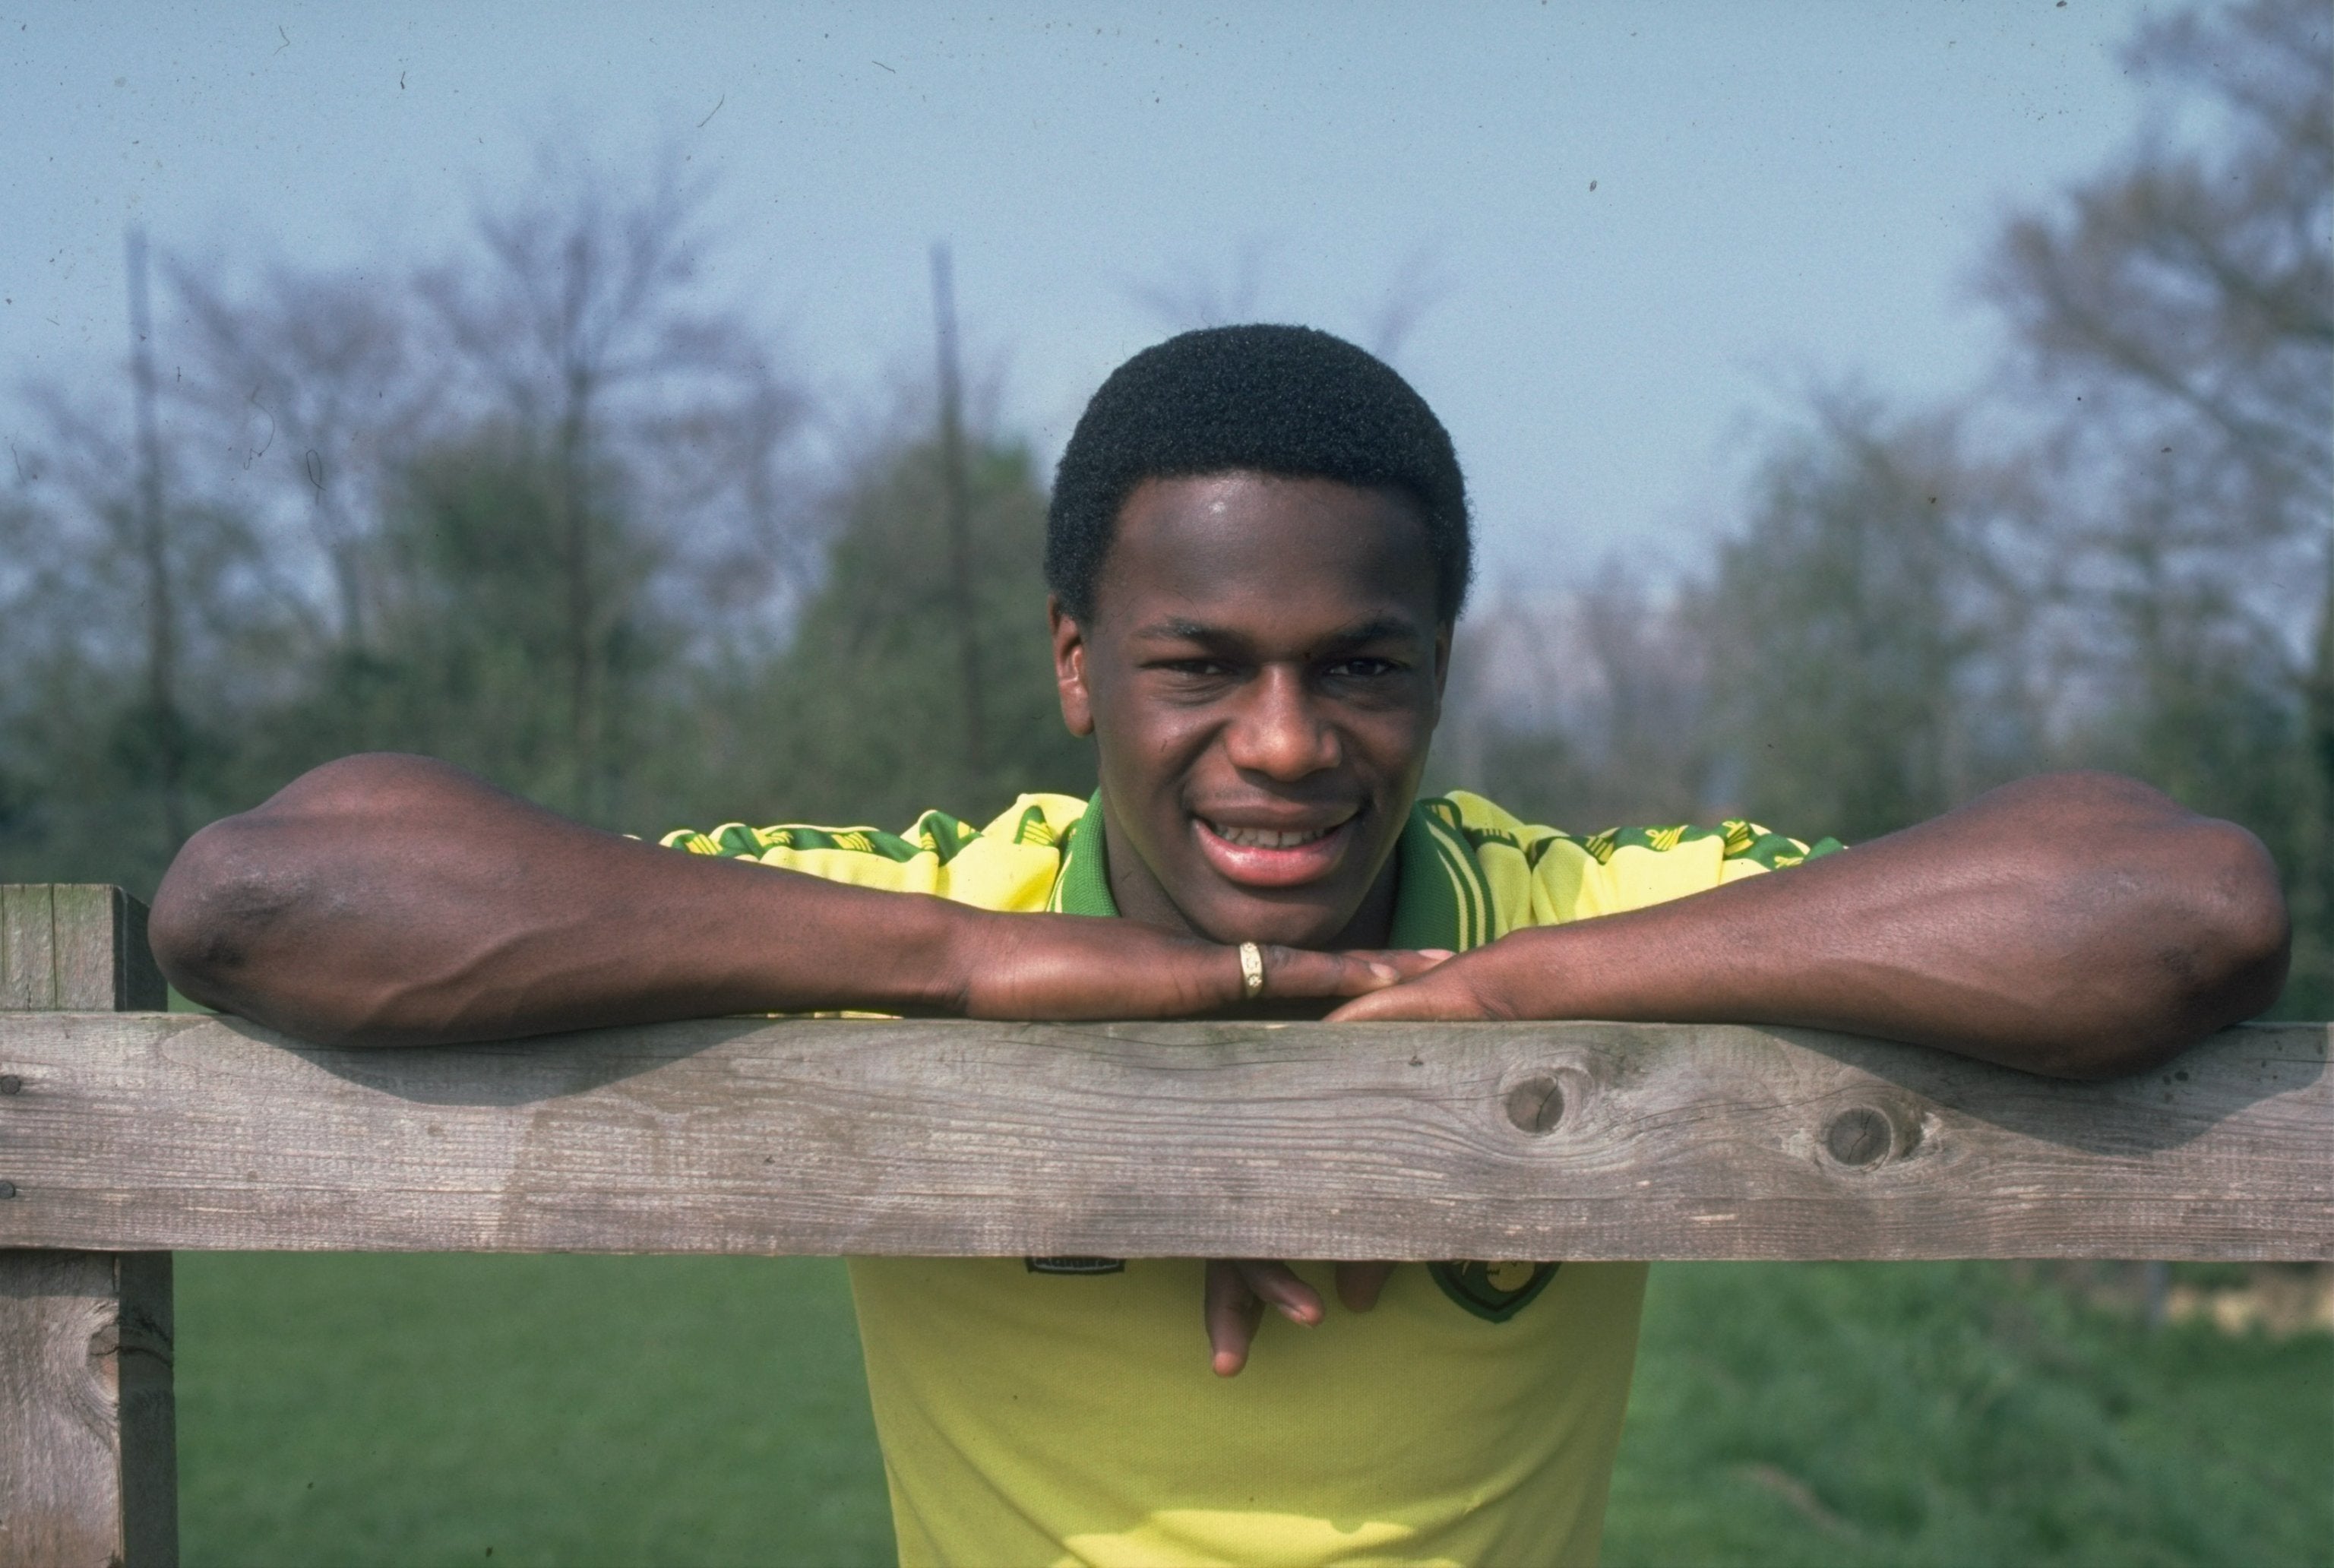 I set up the Justin Fashanu Foundation to provide a safe space for current and future players to know that support exists